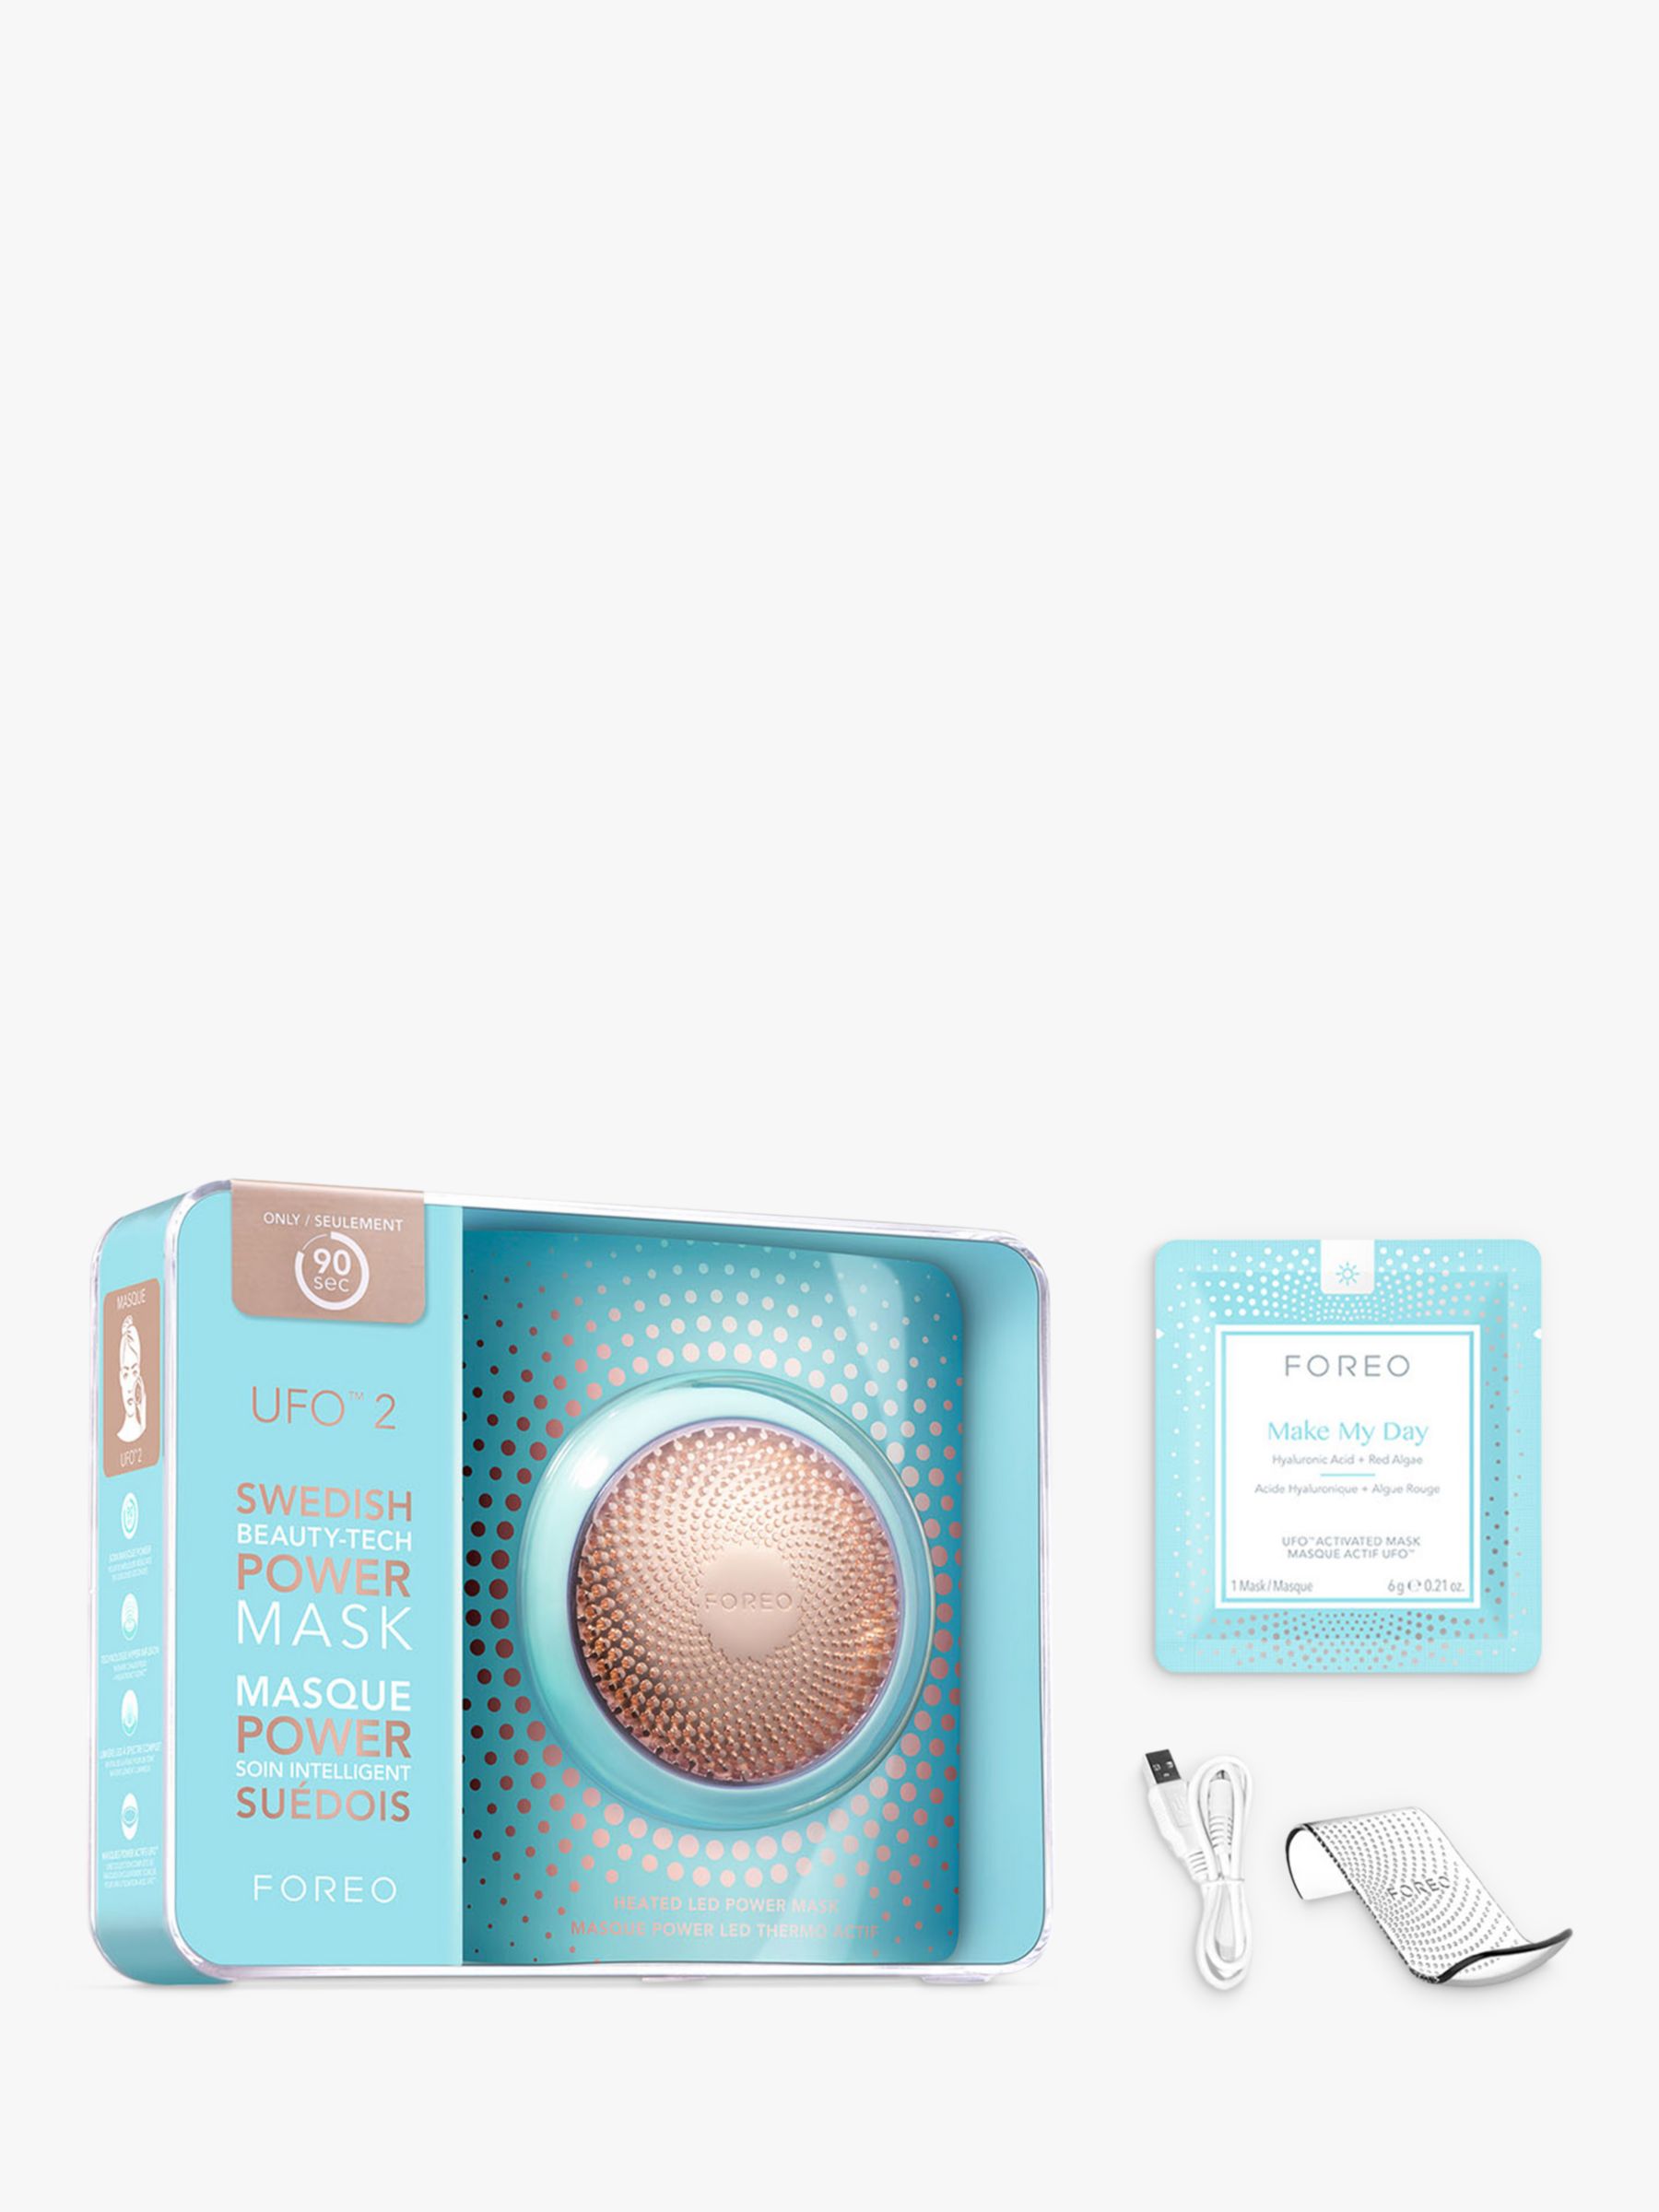 Power FOREO Mask Pearl 2 UFO Device, Treatment Pink